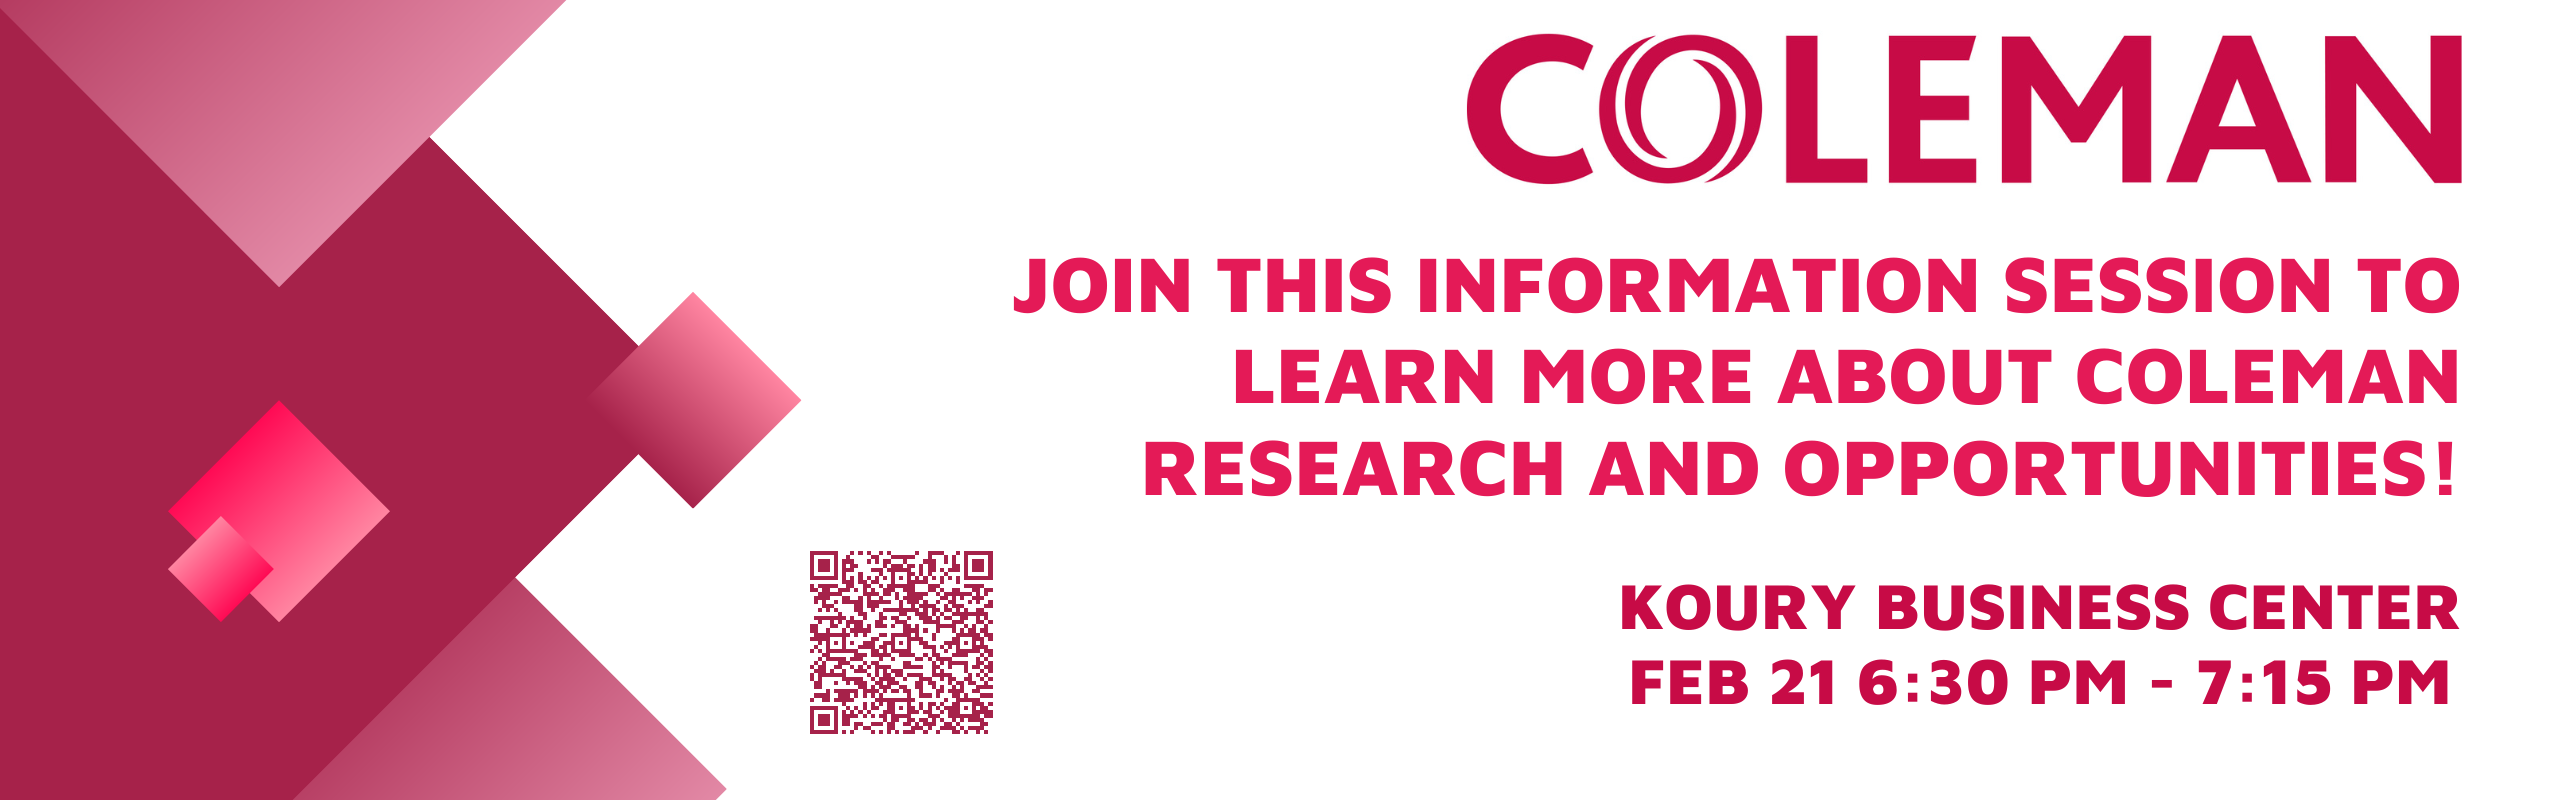 Coleman Research Info Session Koury Business Center Feb 21 at 6:30 pm Review the Elon Job Network for Details